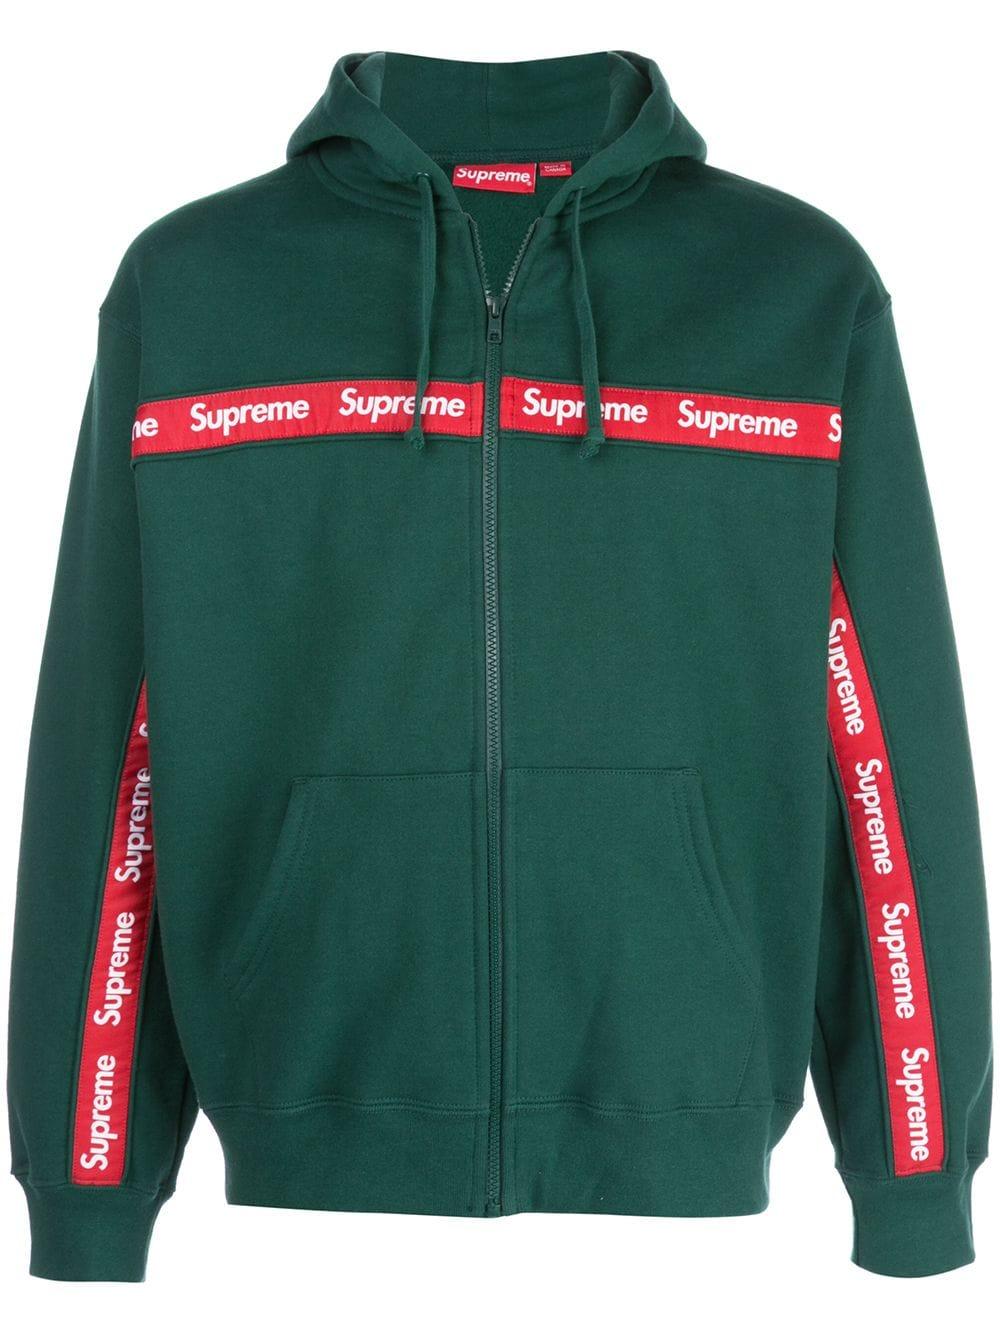 Supreme Cotton Text Stripe Zip Up Hoodie in Green for Men - Lyst